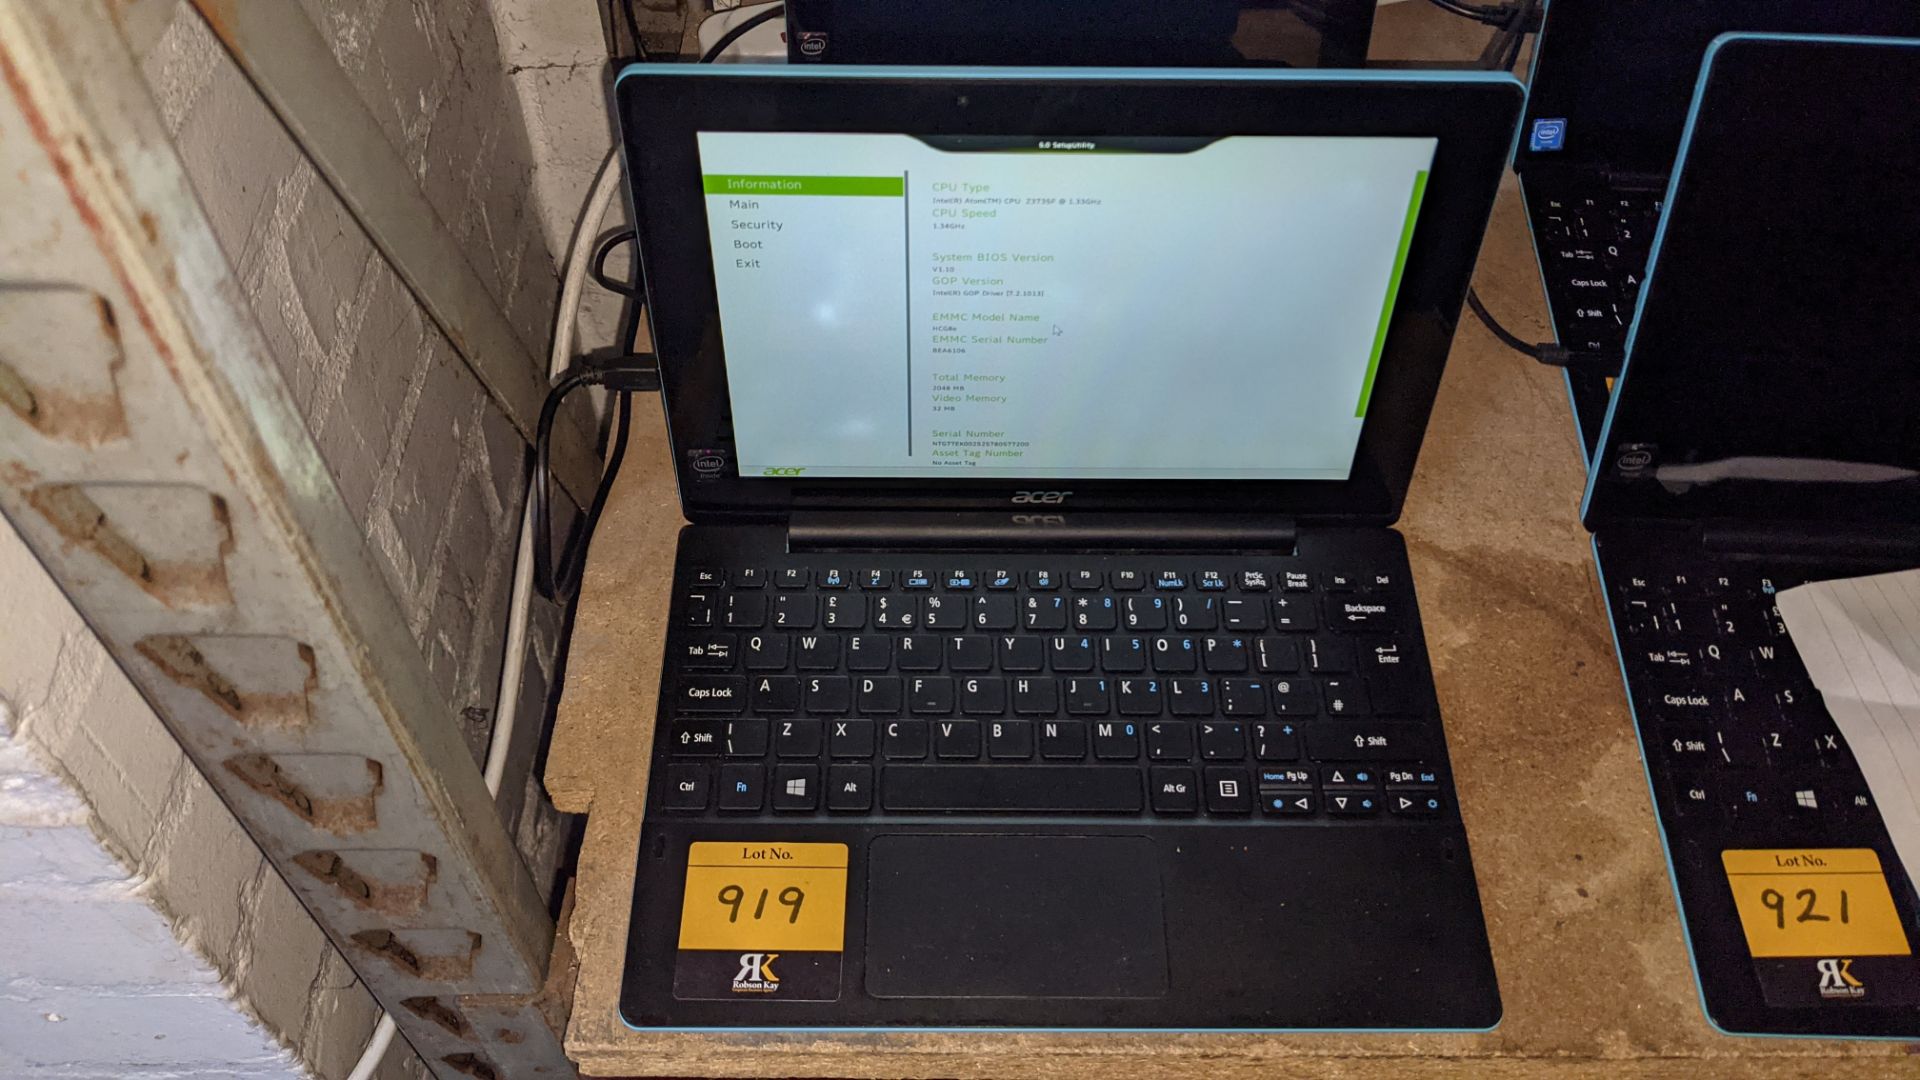 Acer notebook comprising touchscreen tablet and detachable keyboard Aspire Switch 10 E, Atom Z3735F - Image 2 of 13